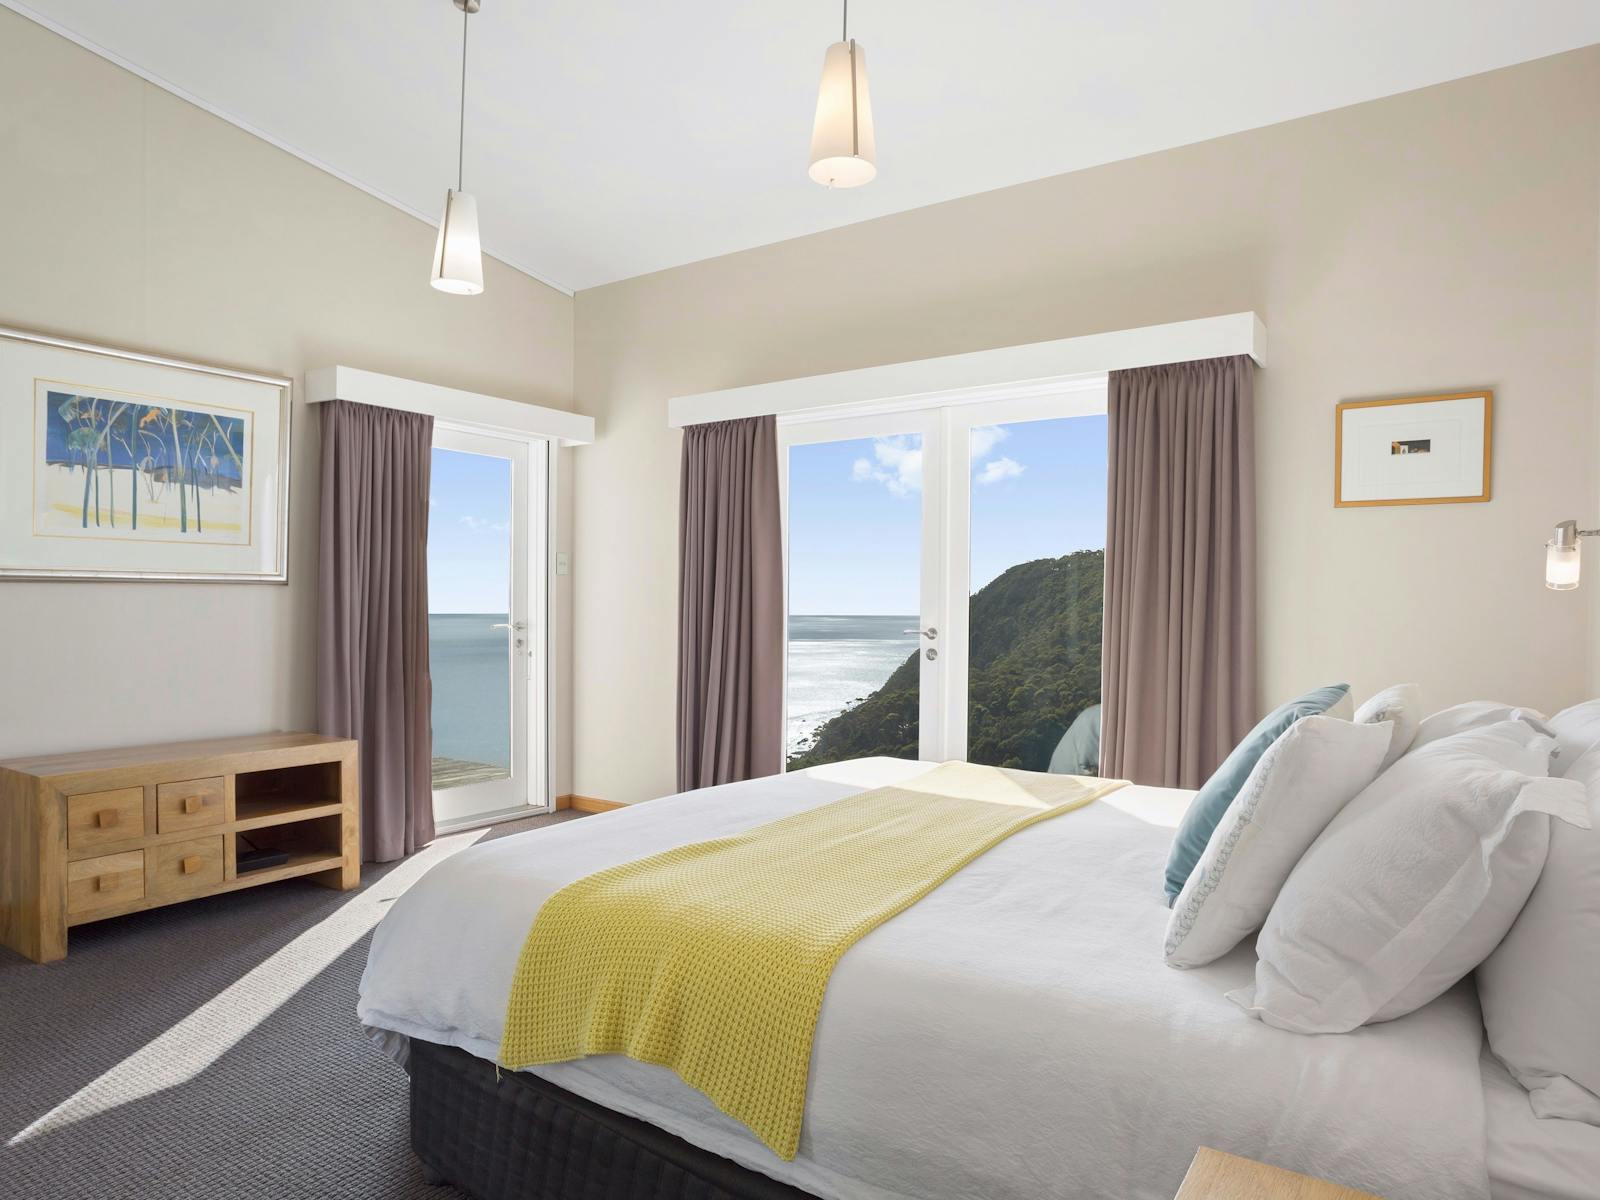 Master bedroom with a stunning view over Bass Strait